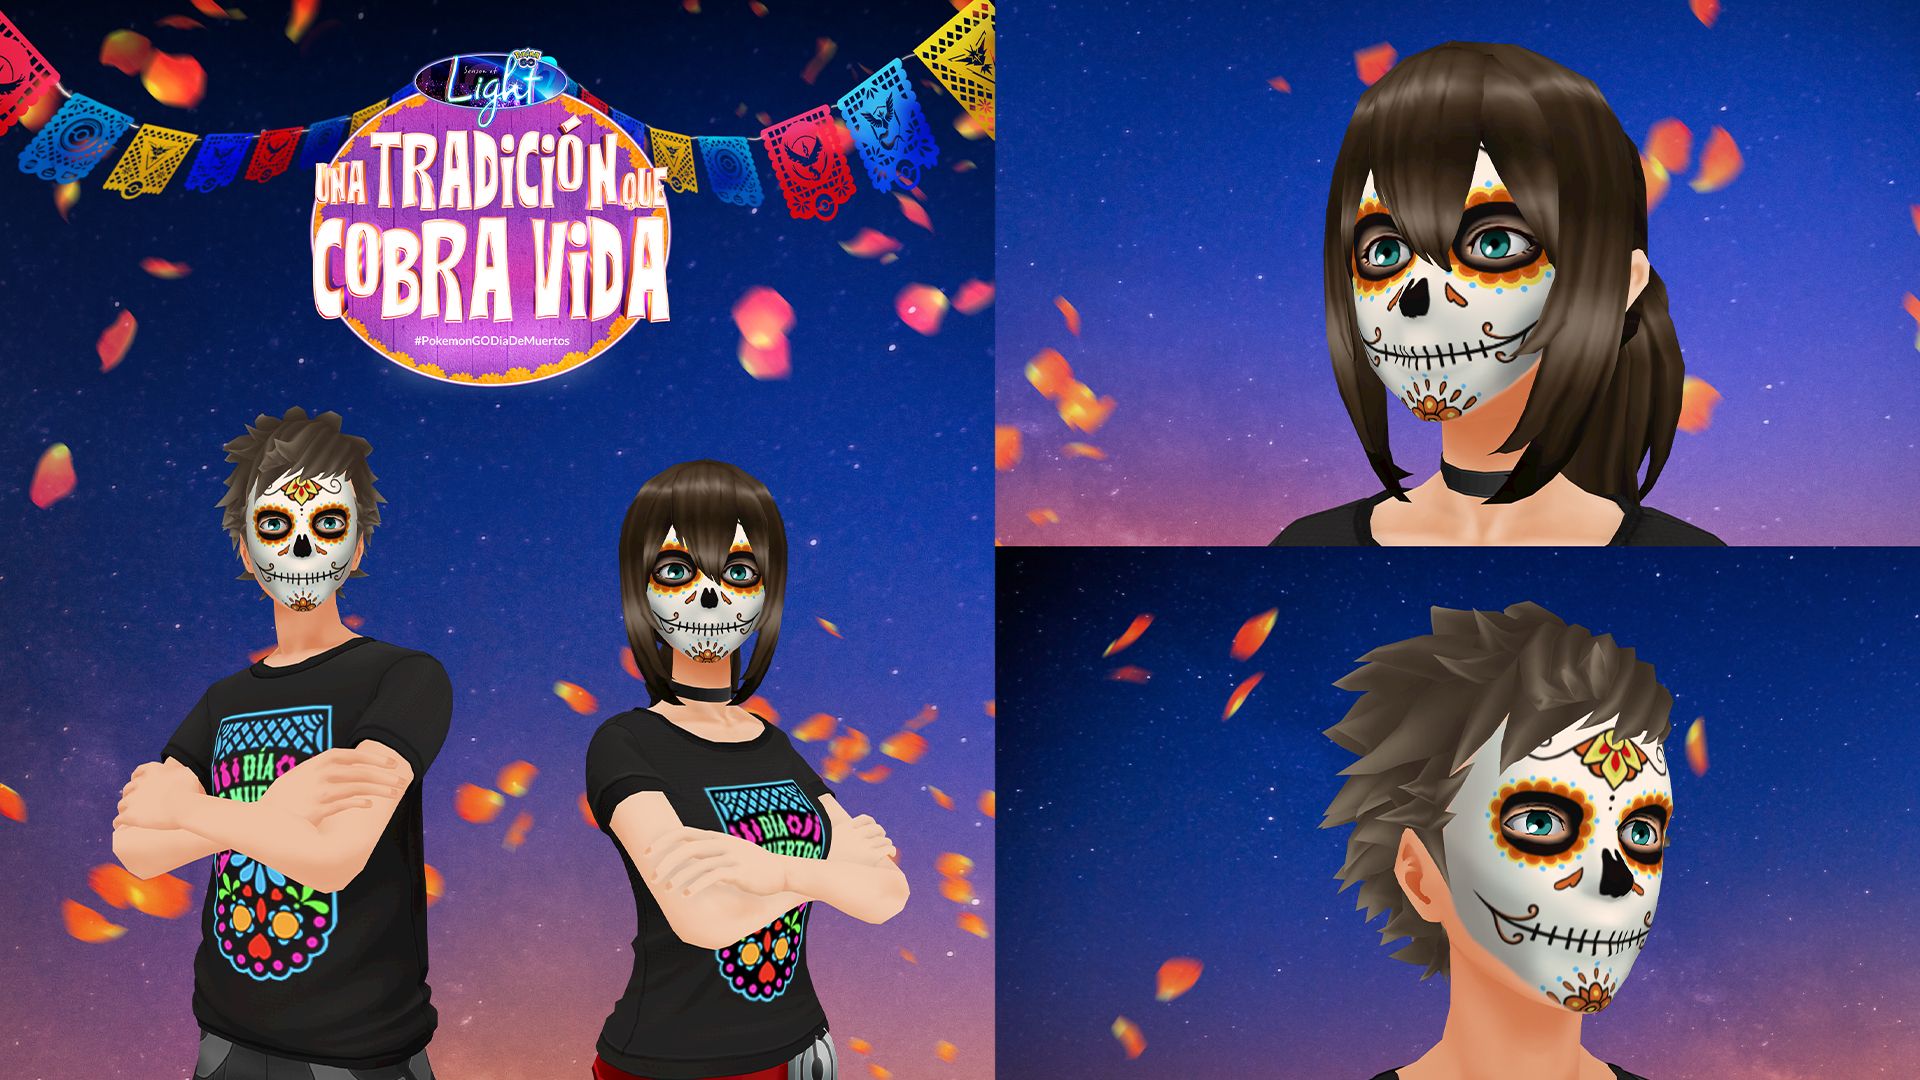 Images of four Avatars from Pokemon Go, all wearing Dia de Muertos Avatar Items